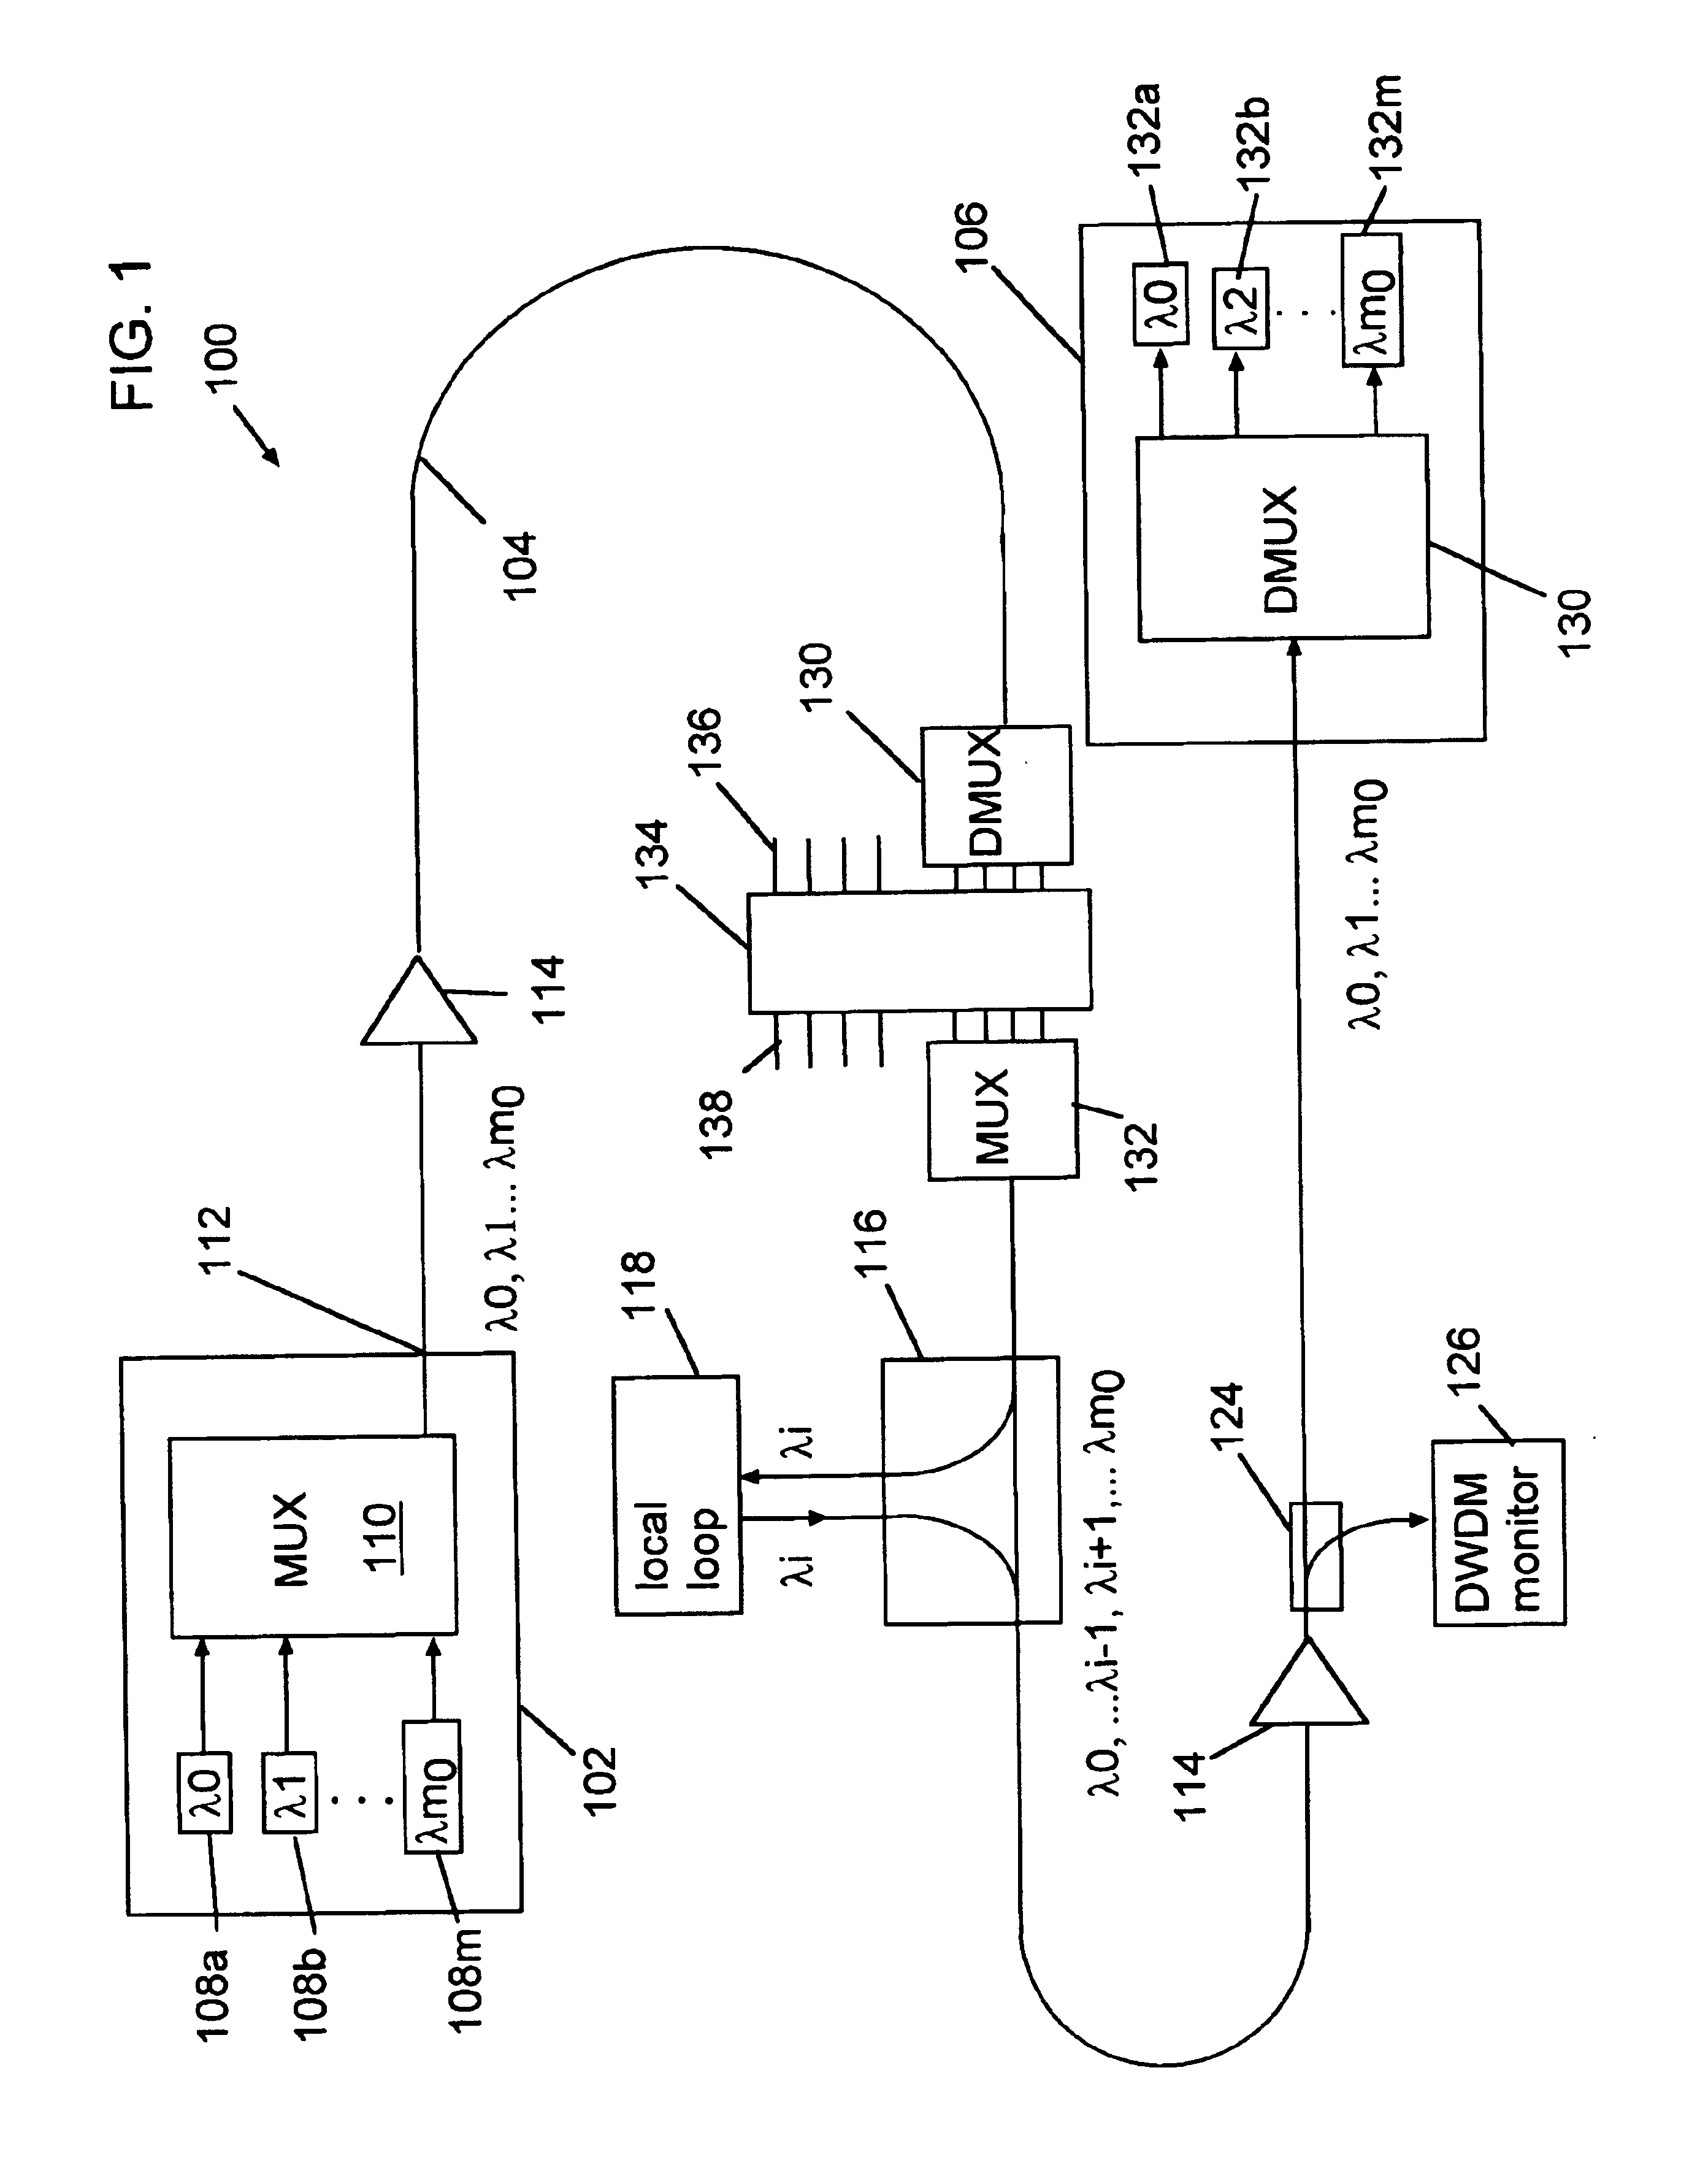 Wavelength division multiplexed device